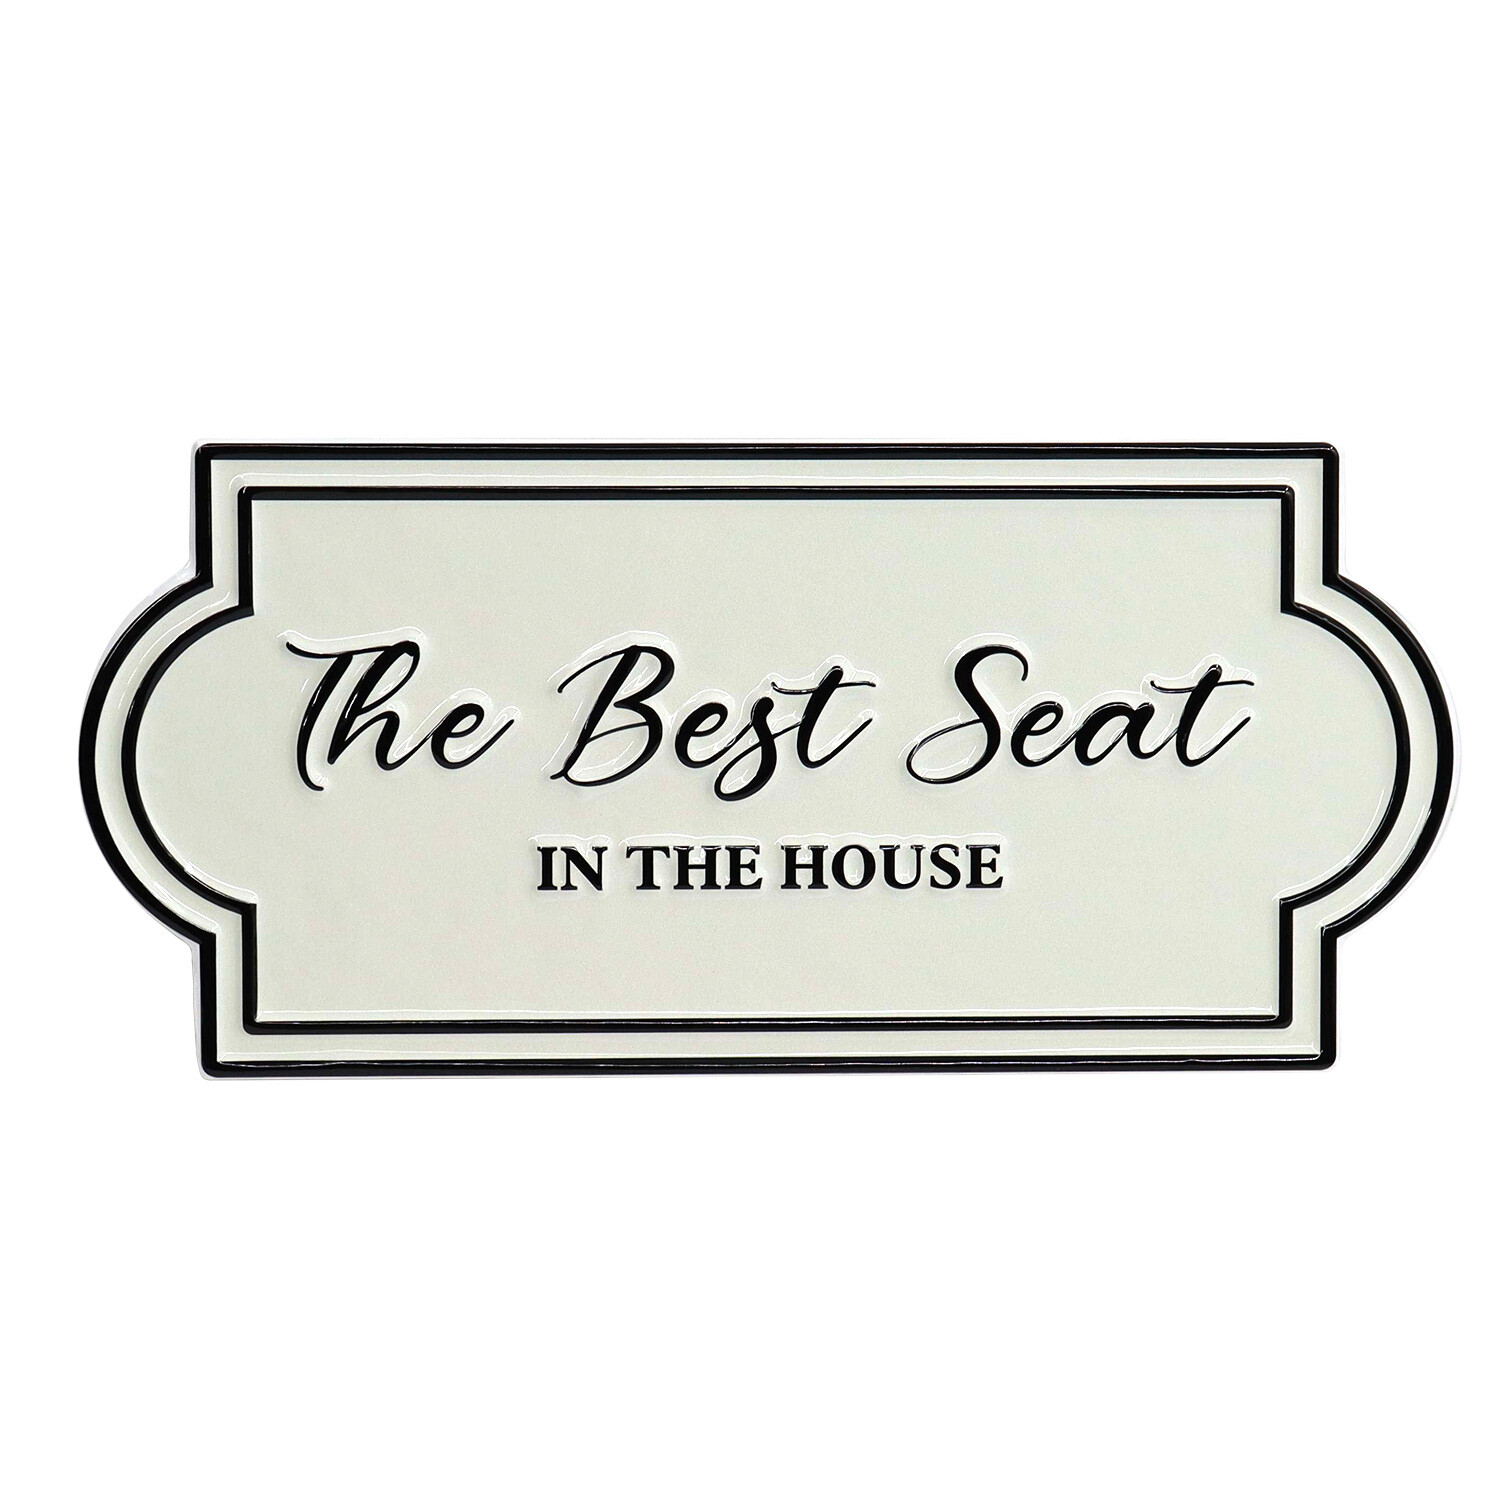 Best Seat In The House Metal Plaque - White Image 1